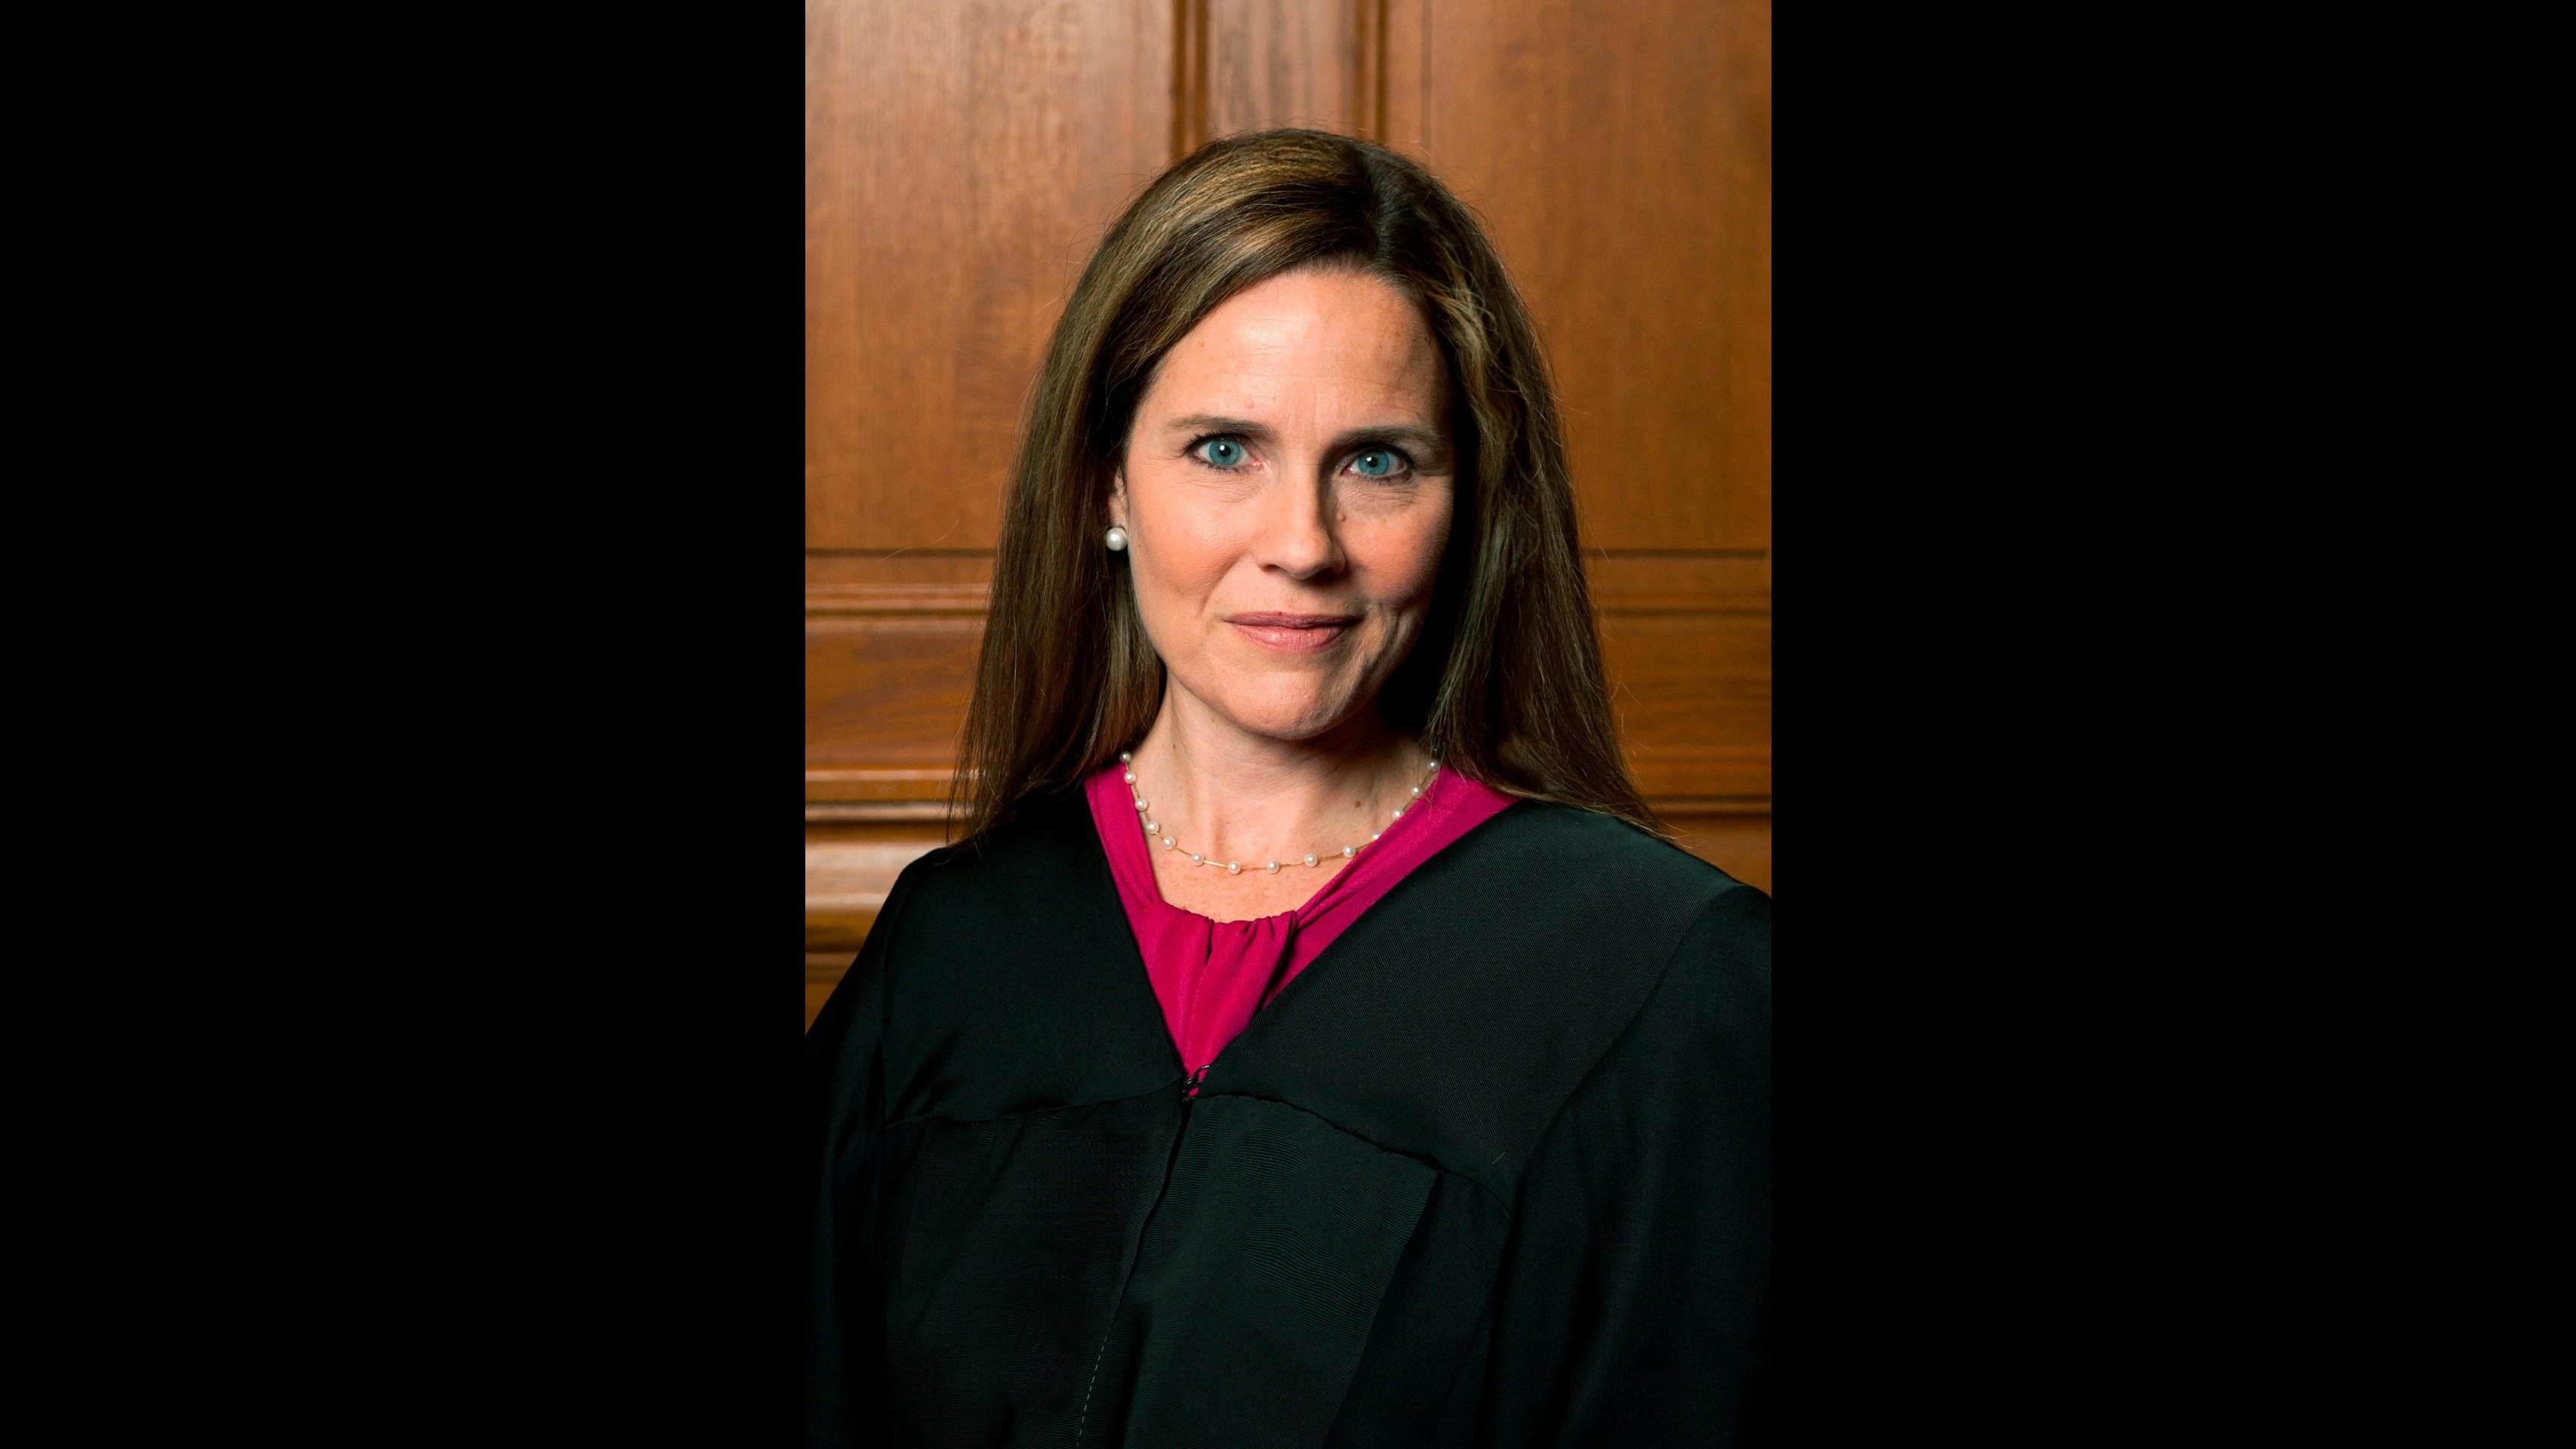 This image provided by Rachel Malehorn shows Judge Amy Coney Barrett in Milwaukee, on Aug. 24, 2018. (Rachel Malehorn, rachelmalehorn.smugmug.com, via AP)